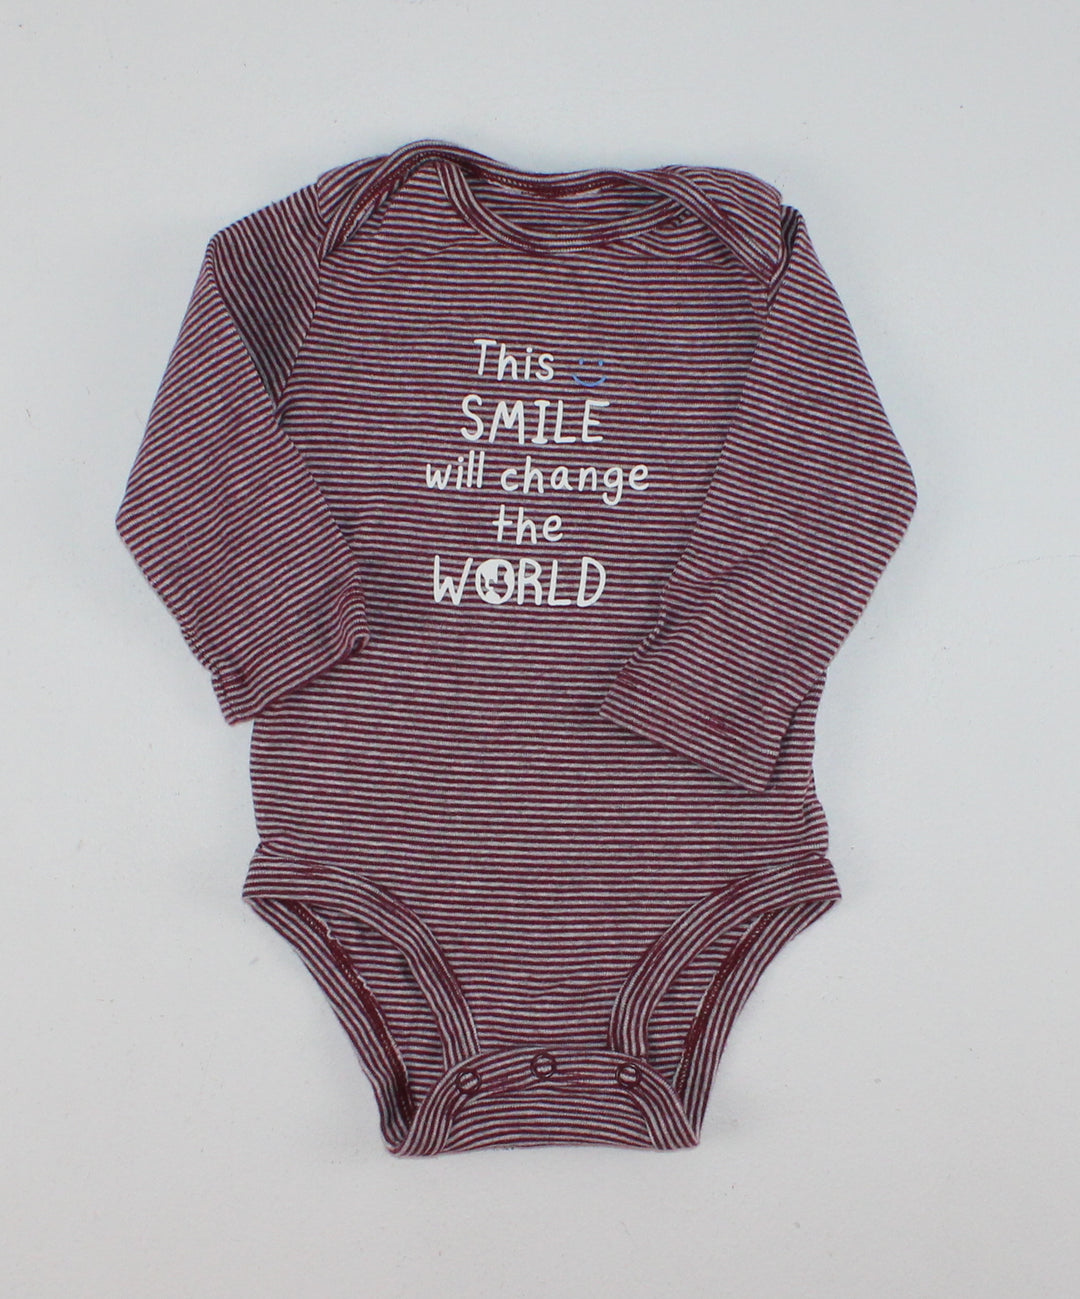 CARTERS THIS SMILE CAN CHANGE THE WORLD ONESIE 6M EUC